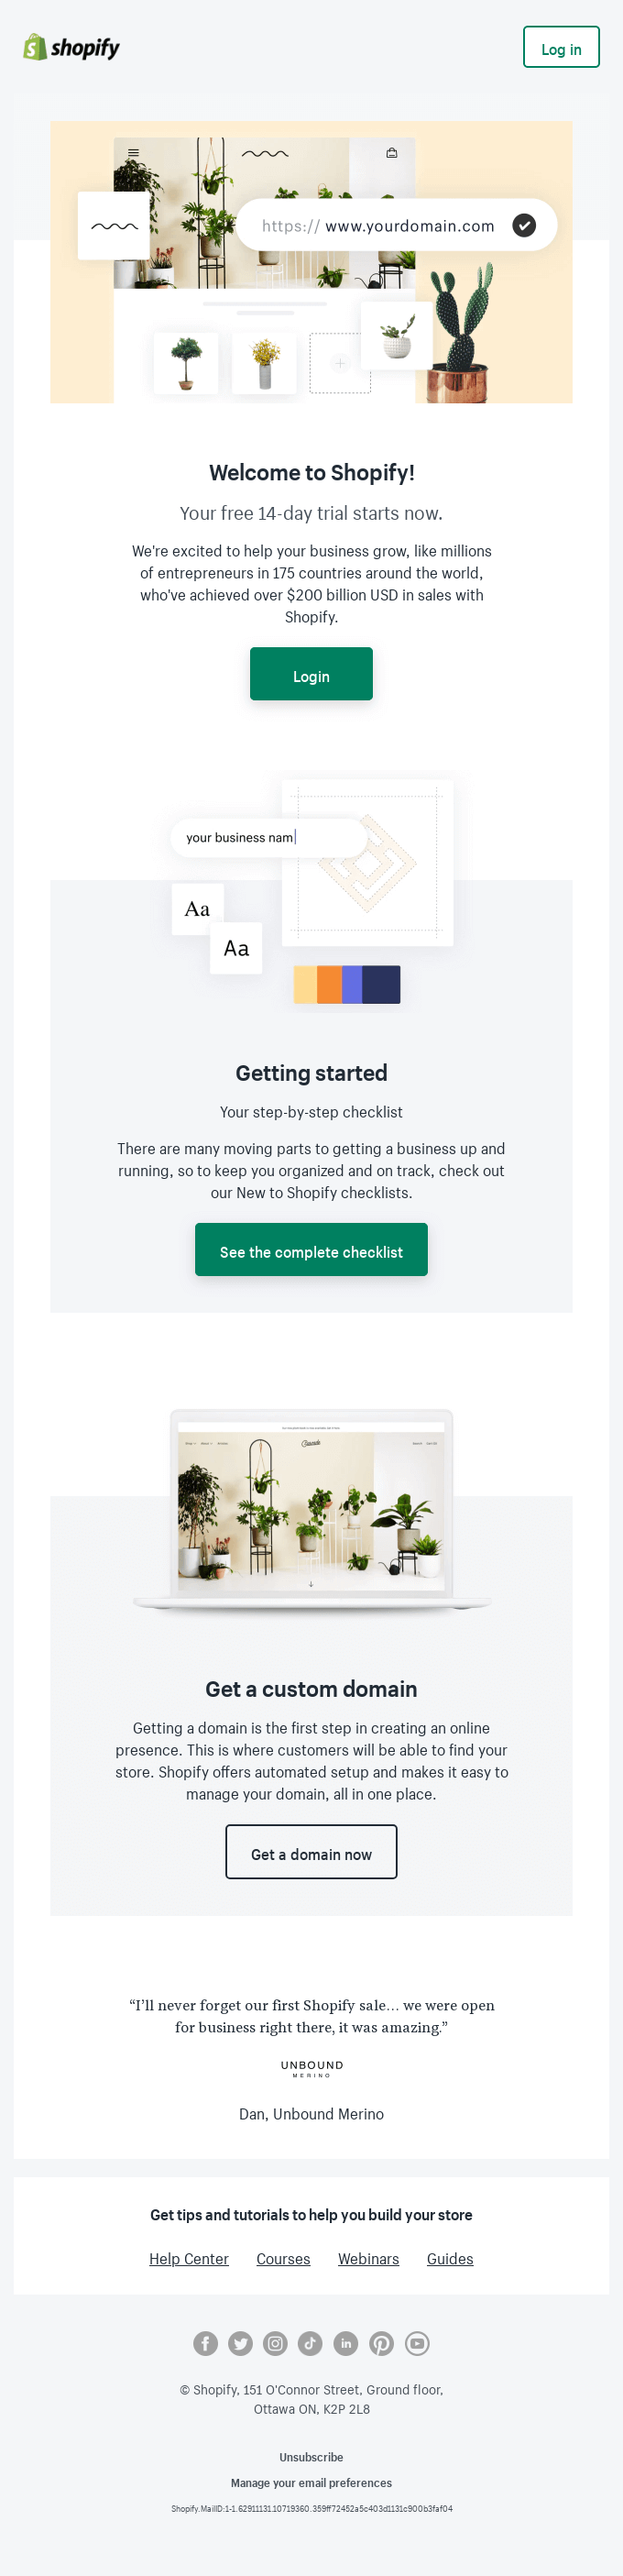 shopify b2b welcome email campaign